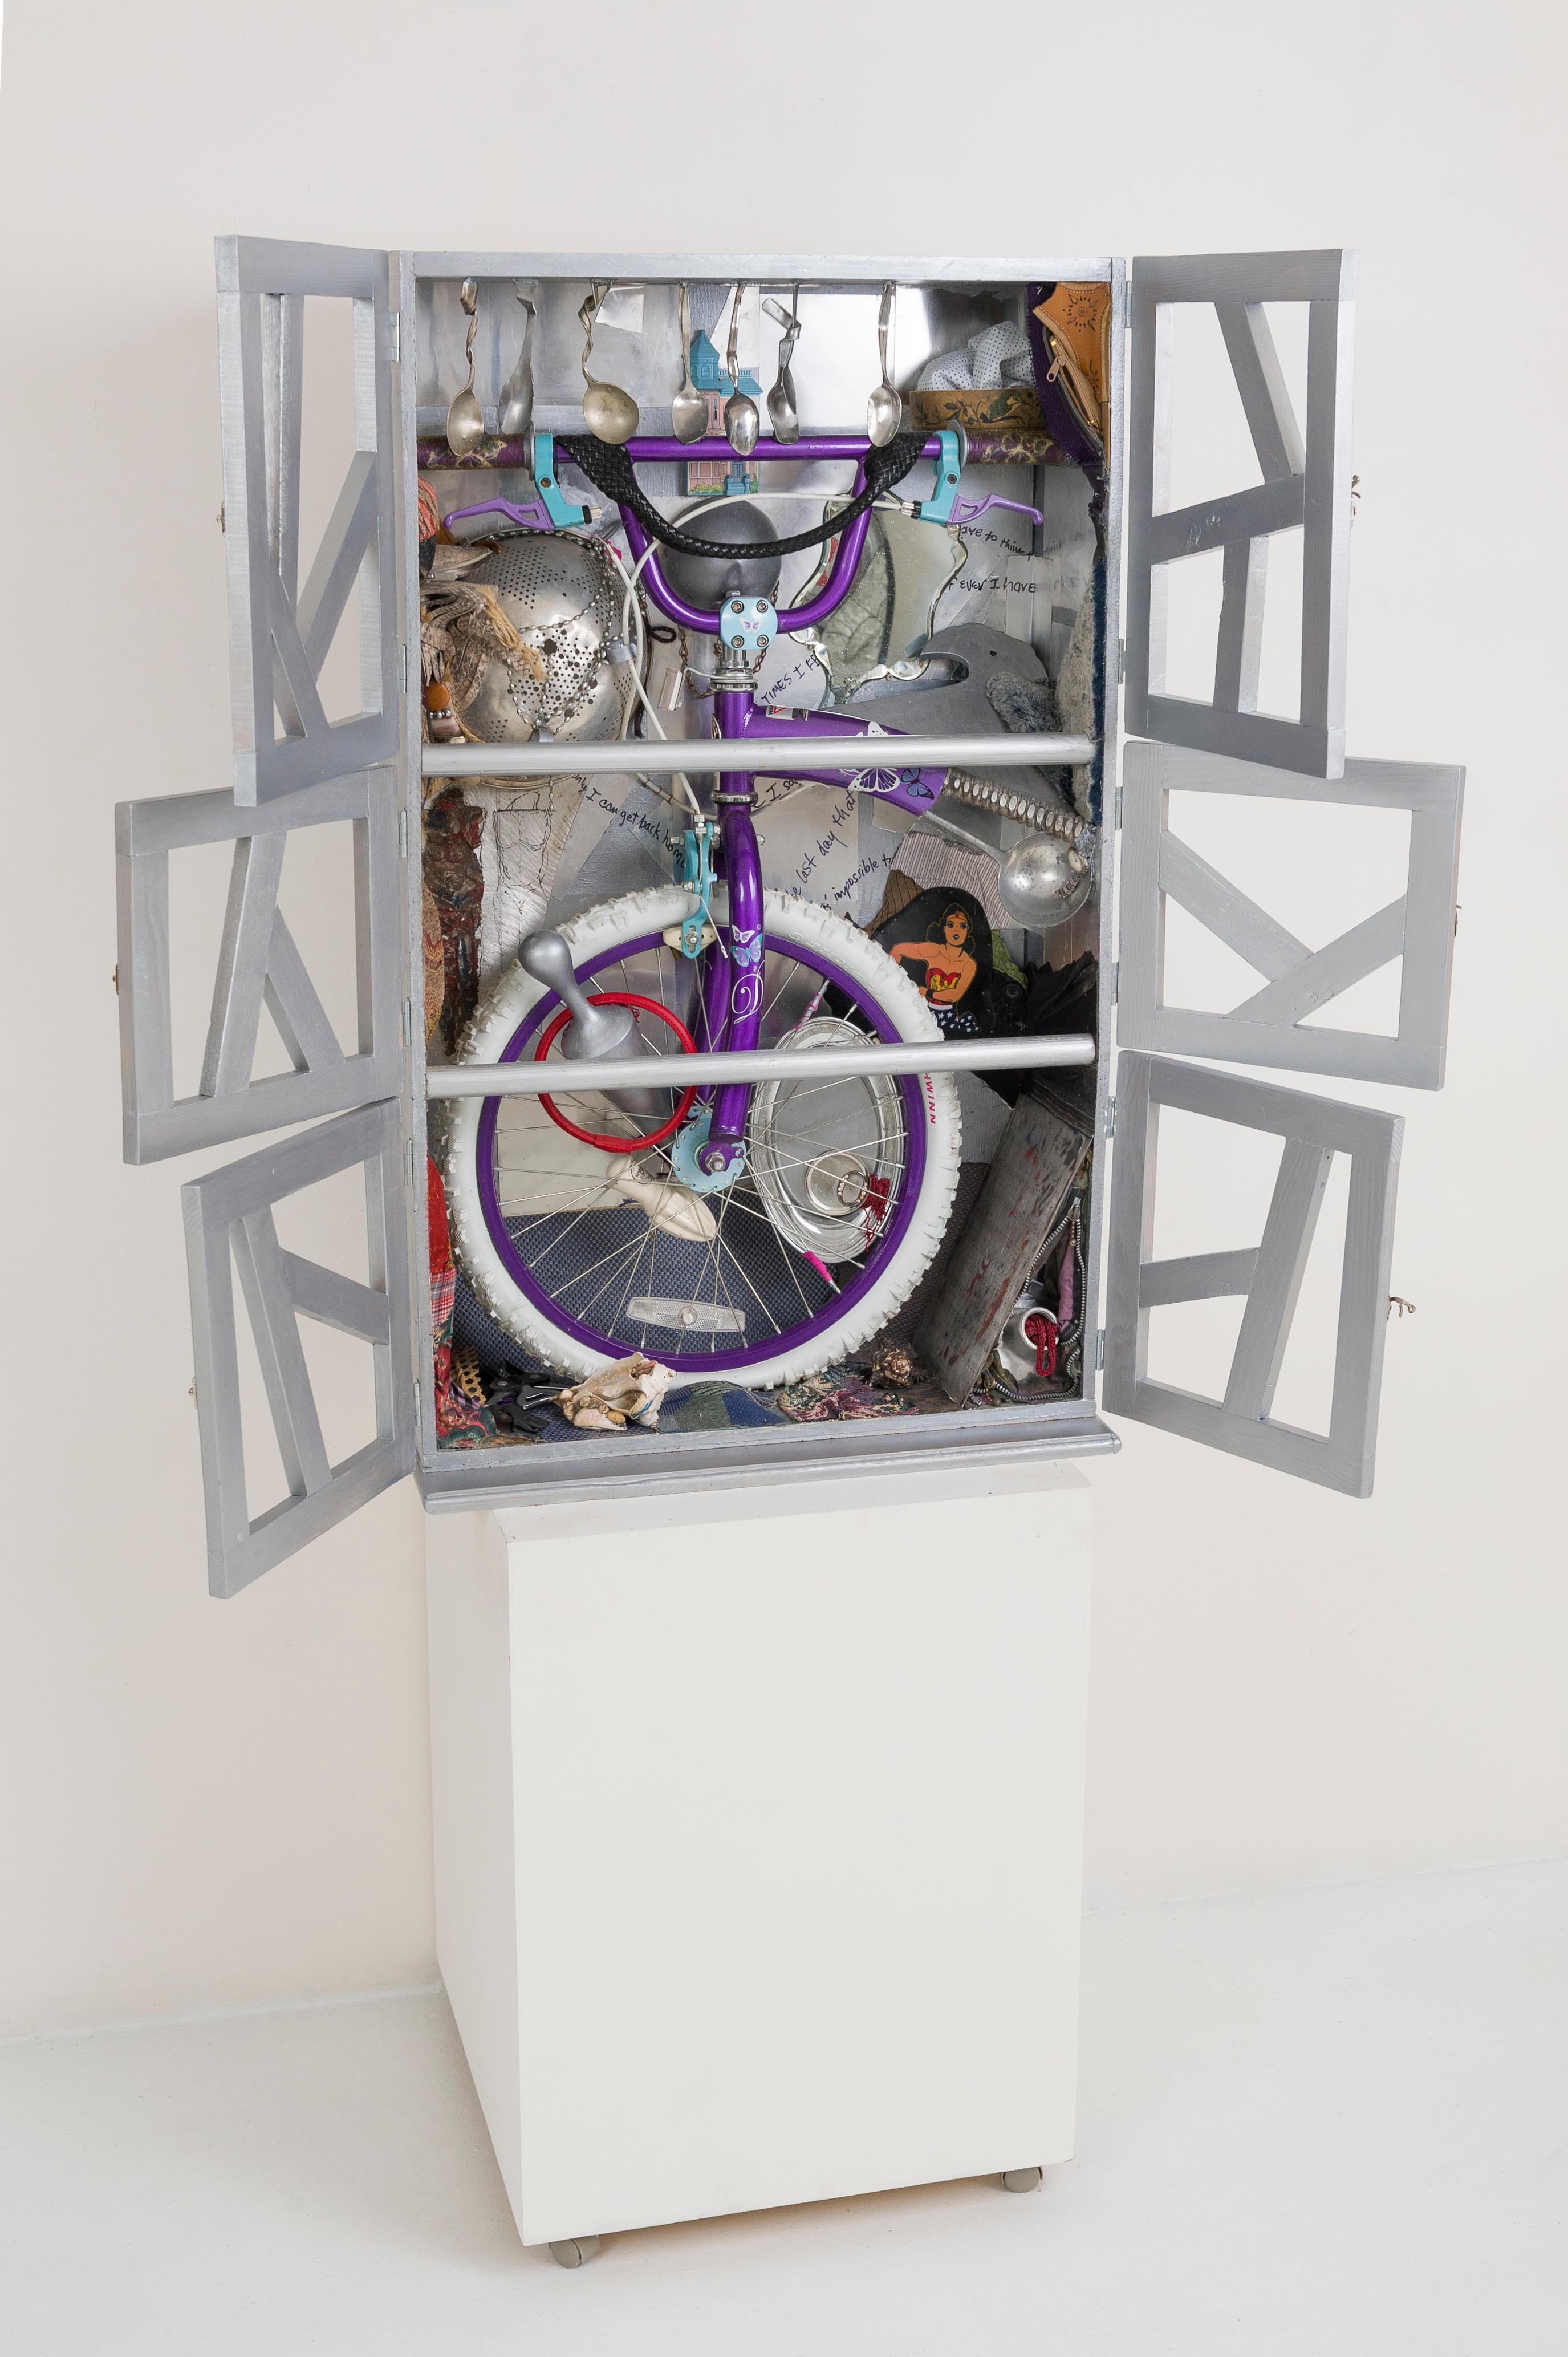 Linda Stein Abstract Sculpture - Closet with Bicycle 890 - Cabinet of Curiosities, Wunderkammer Art Sculpture